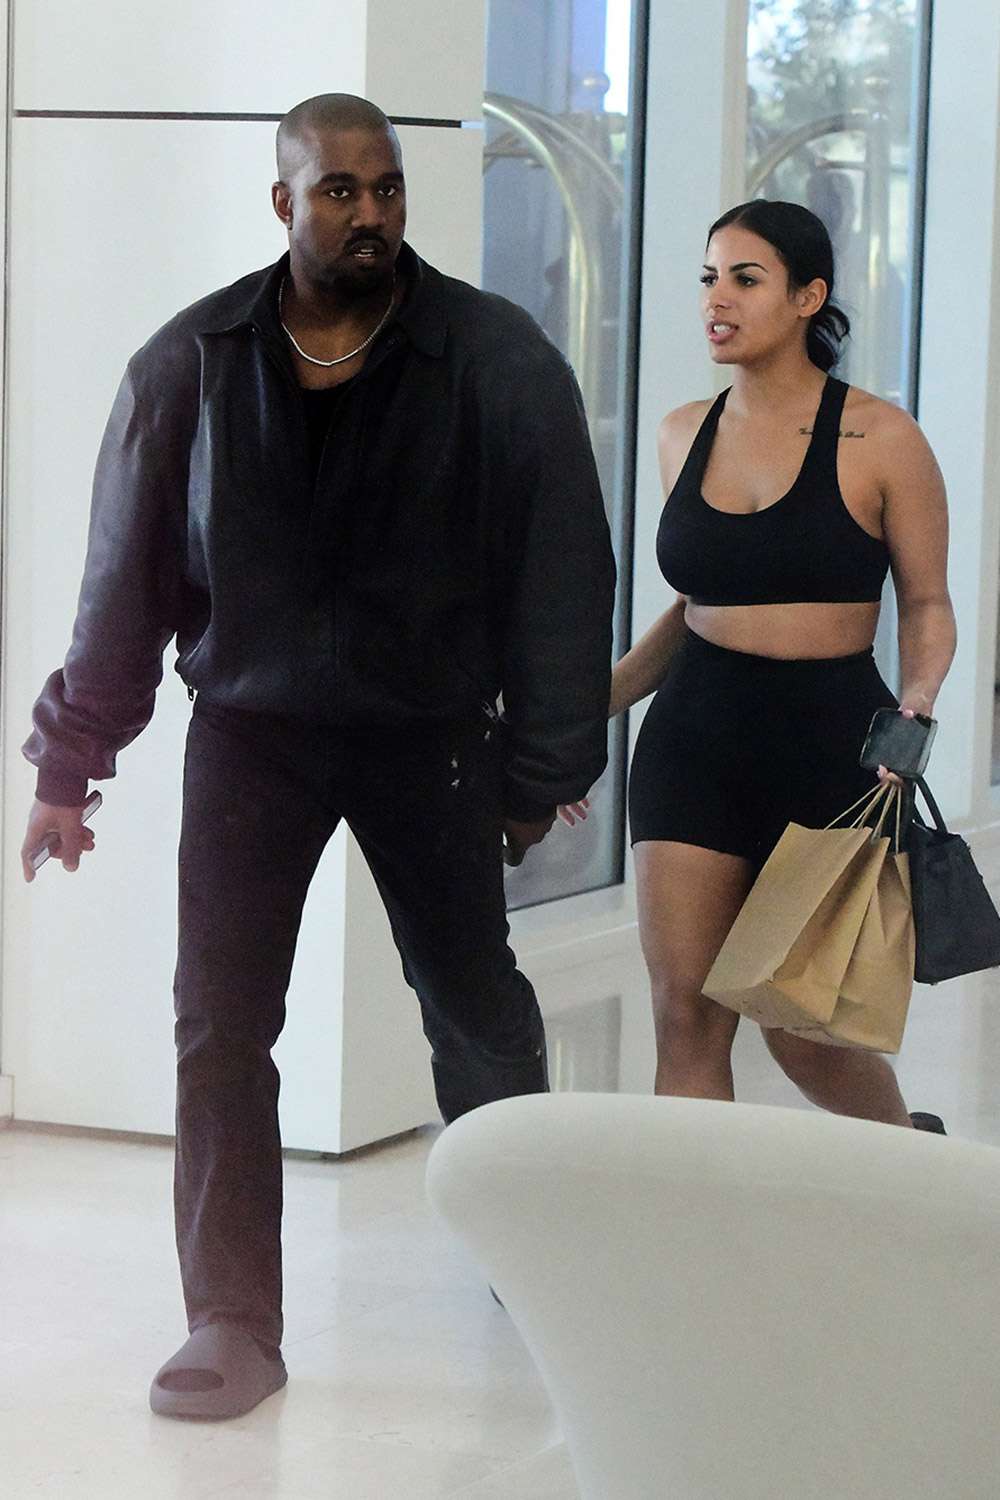 Kanye West Seemingly Confirms Romance with Chaney Jones on Instagram | PEOPLE.com